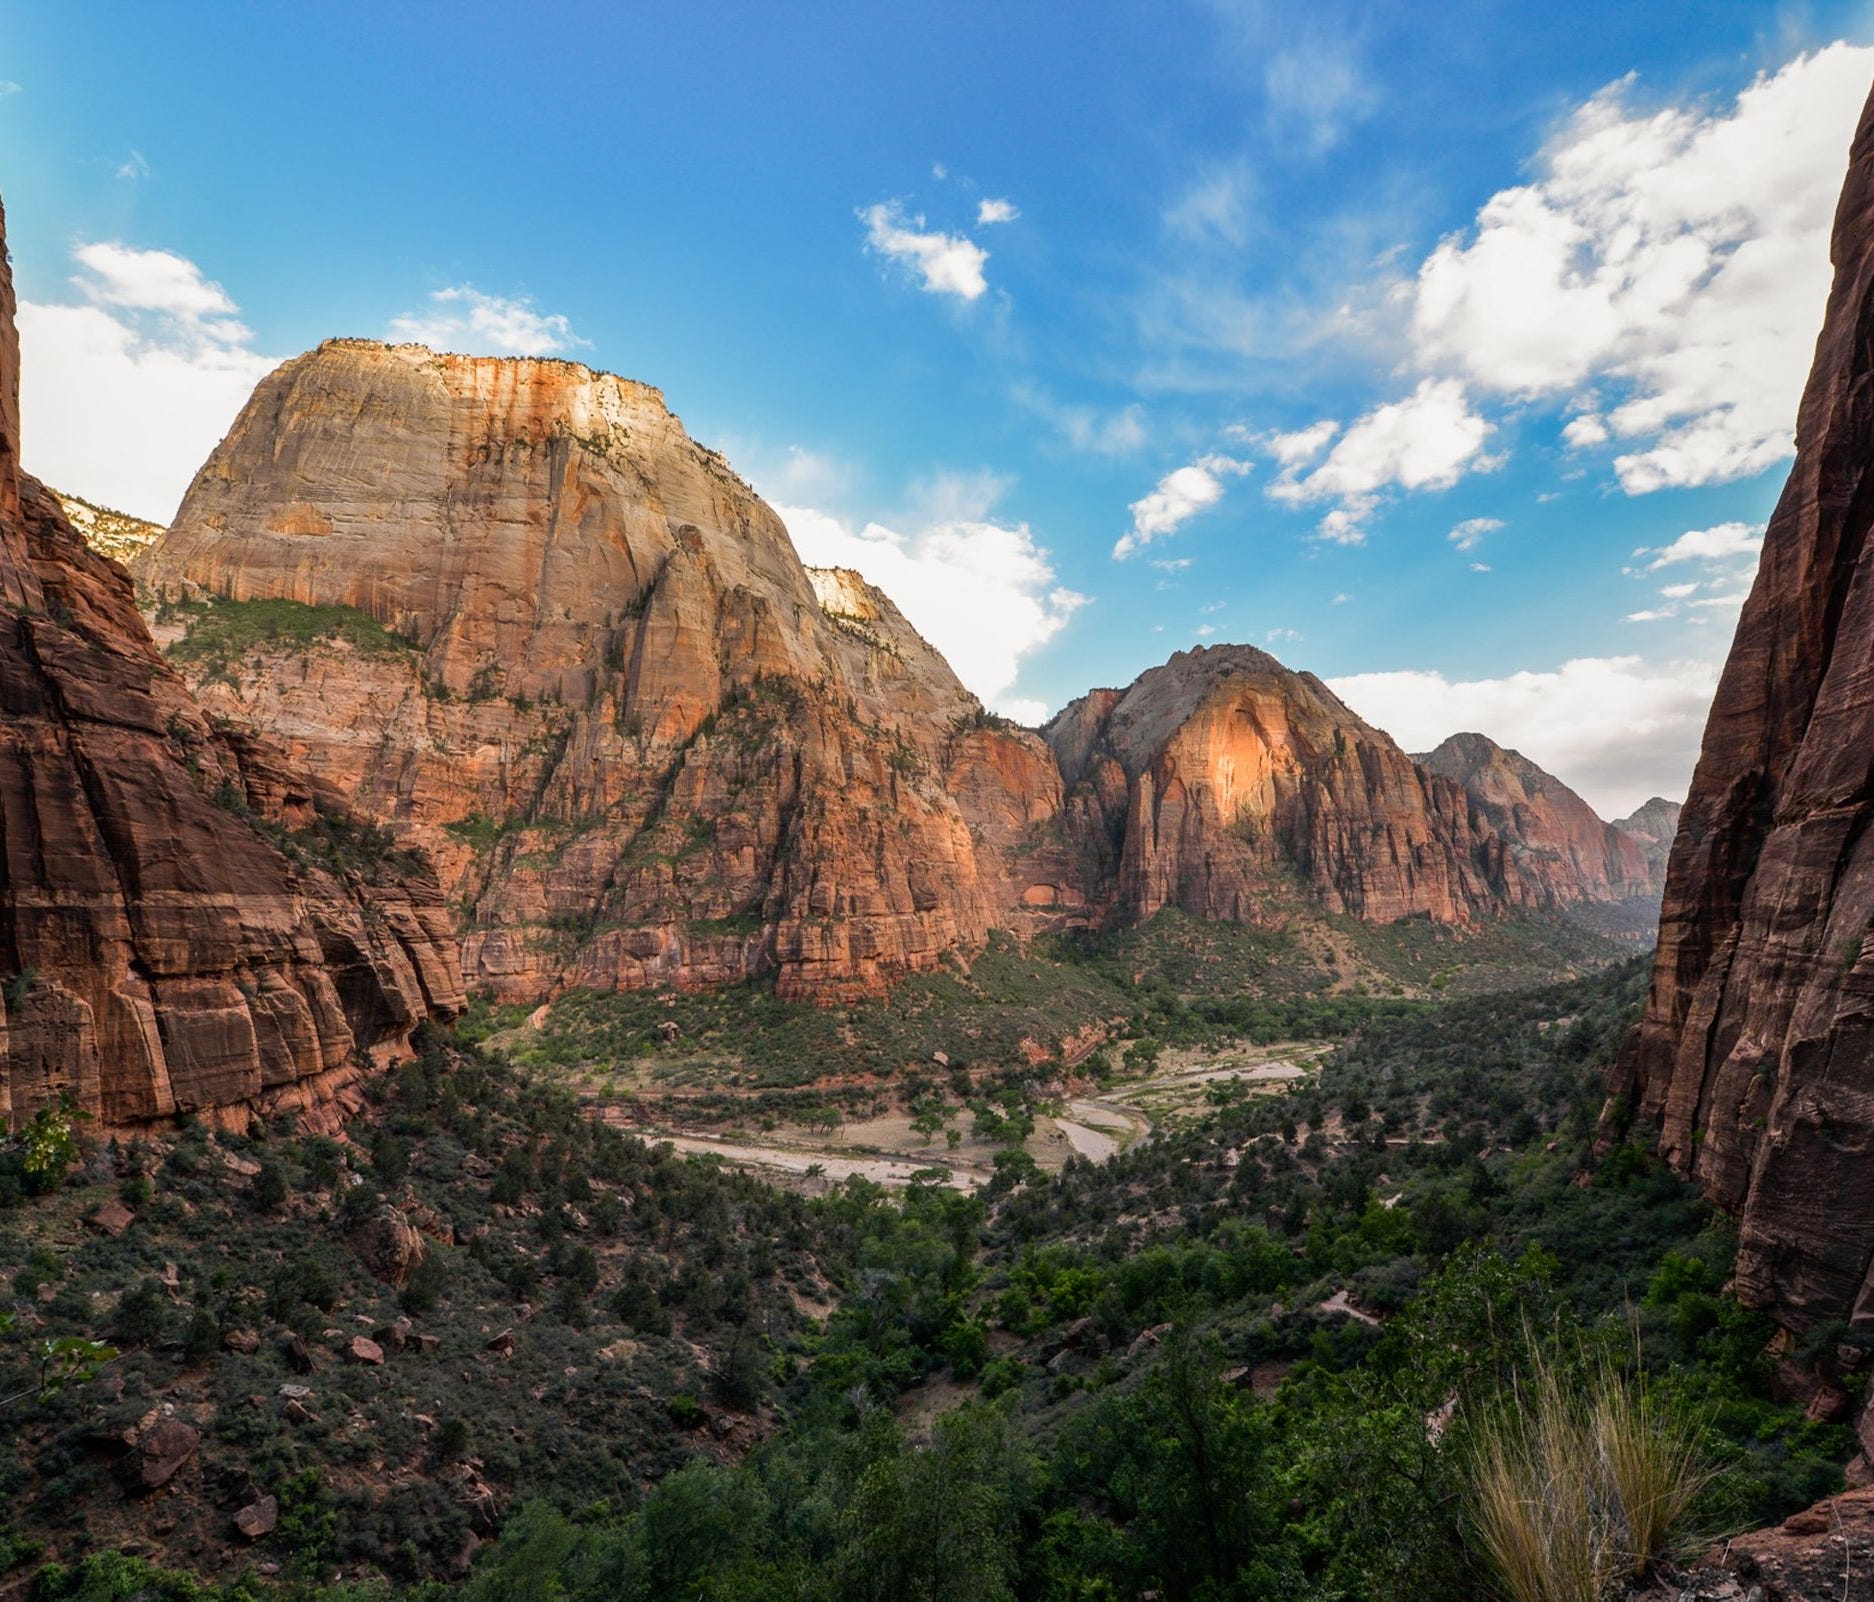 In Southern Utah, Zion National Park and its 229 square miles of towering cliff walls, narrow canyons and absolutely stunning scenery lie about 300 miles from Salt Lake City and 160 miles from Las Vegas.